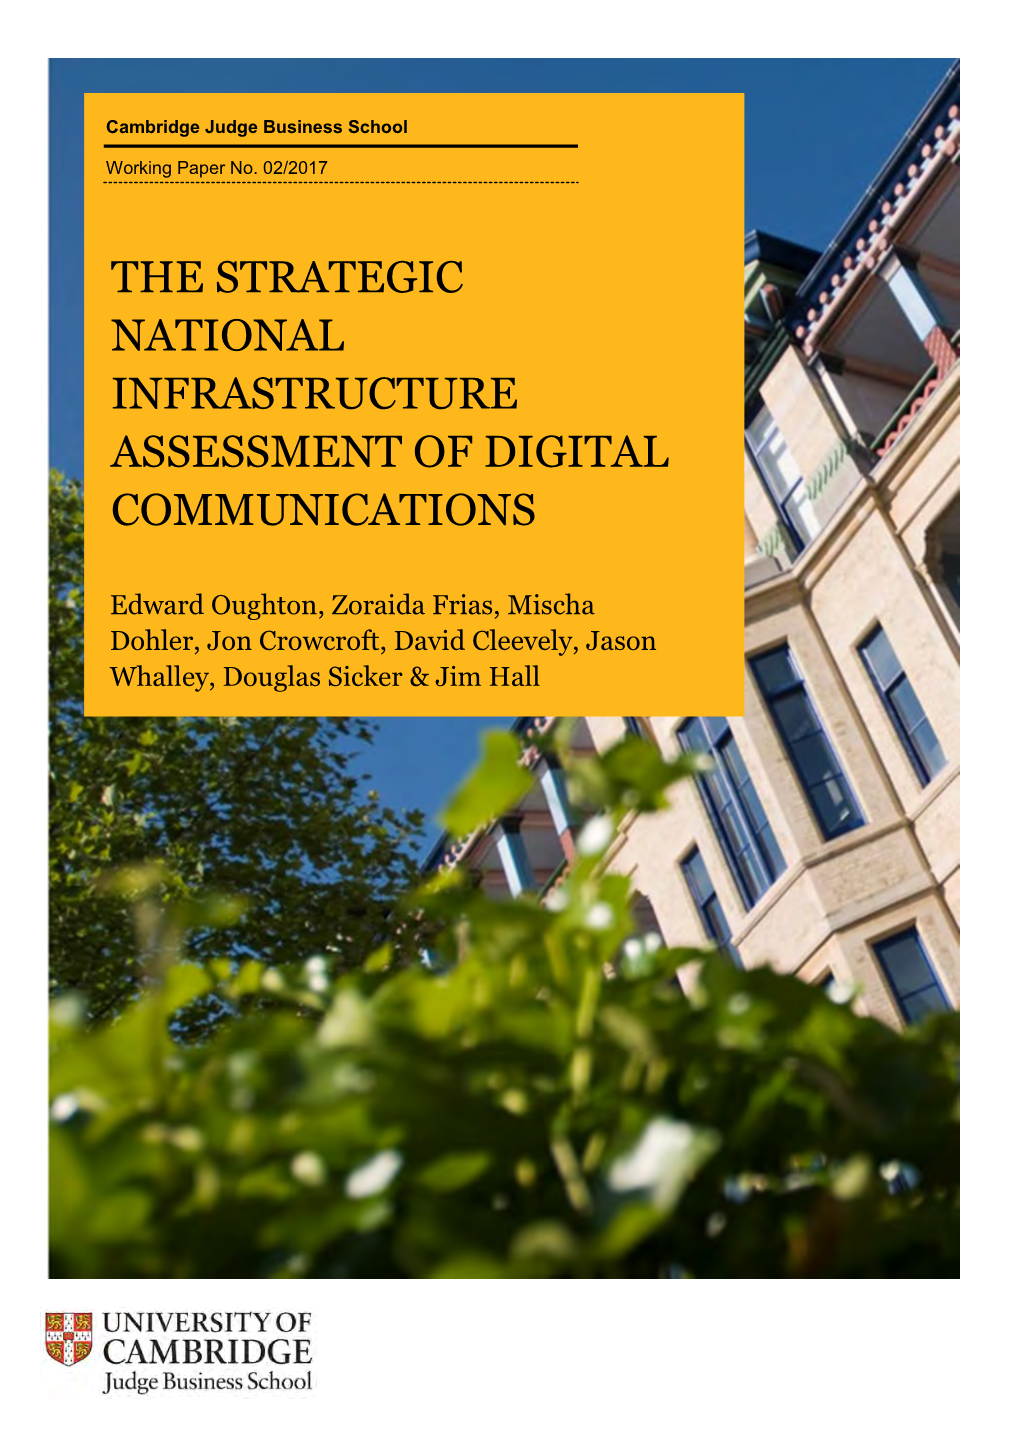 The Strategic National Infrastructure Assessment of Digital Communications